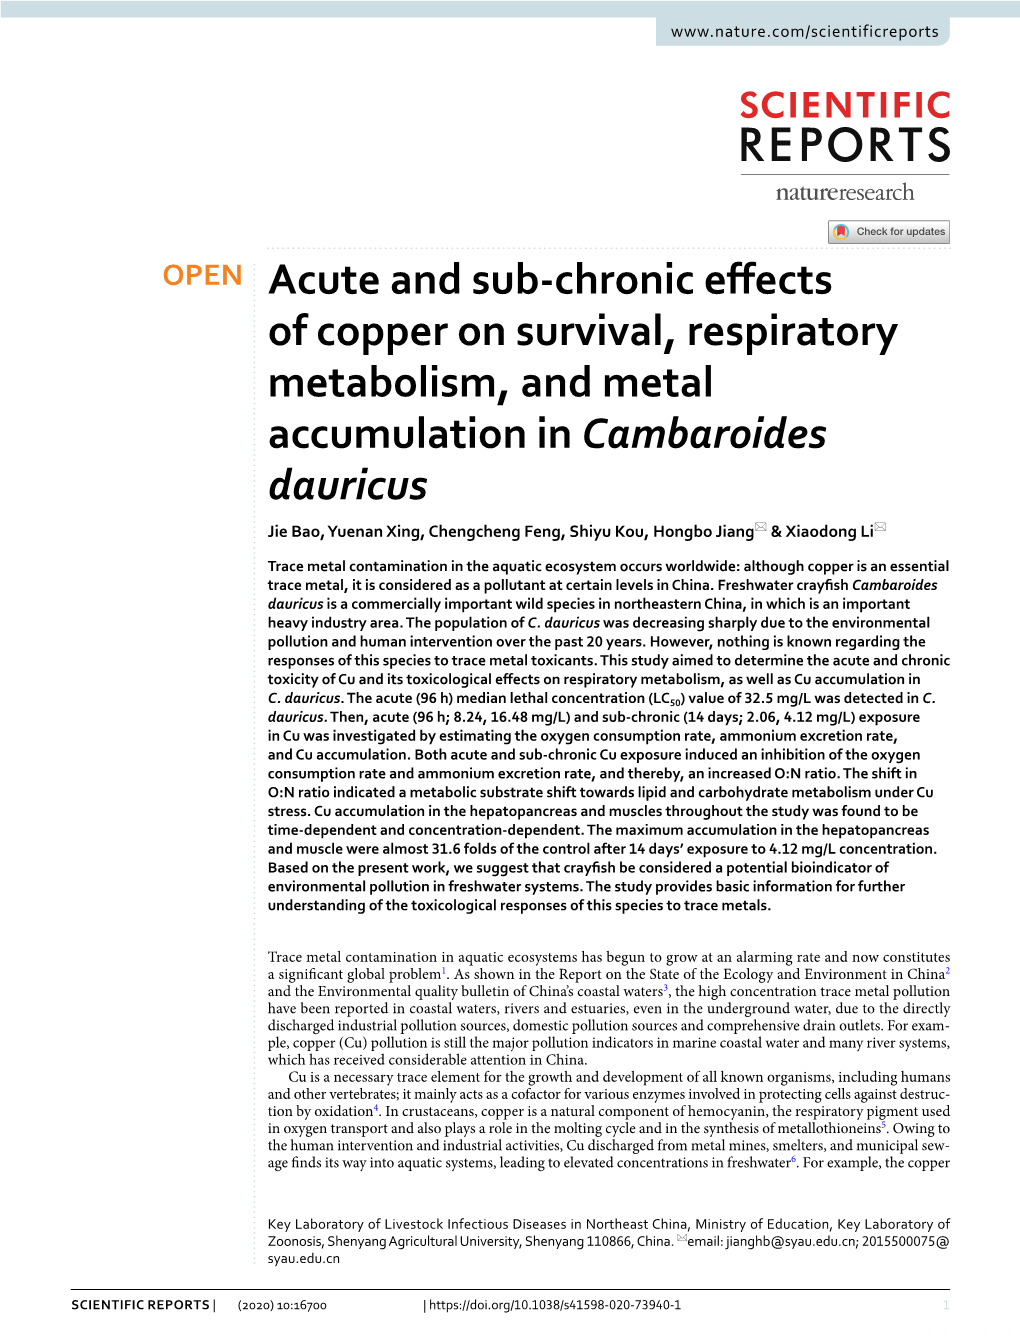 Acute and Sub-Chronic Effects of Copper on Survival, Respiratory